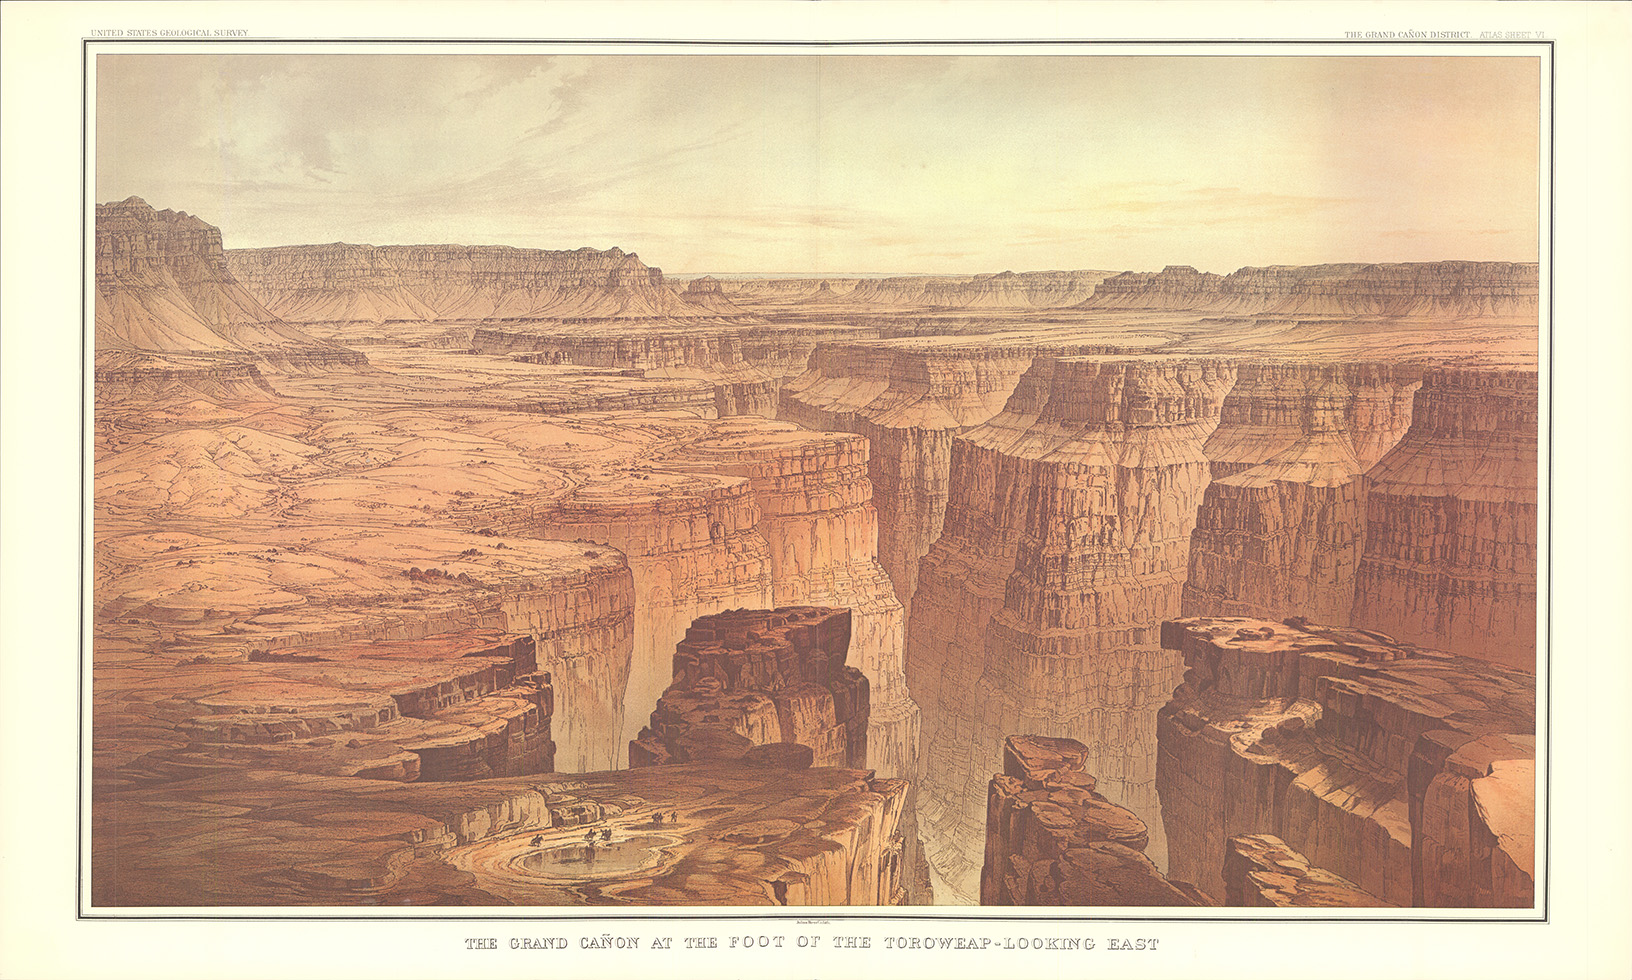 The Grand Canyon at the Foot of the Toroweap - Looking East